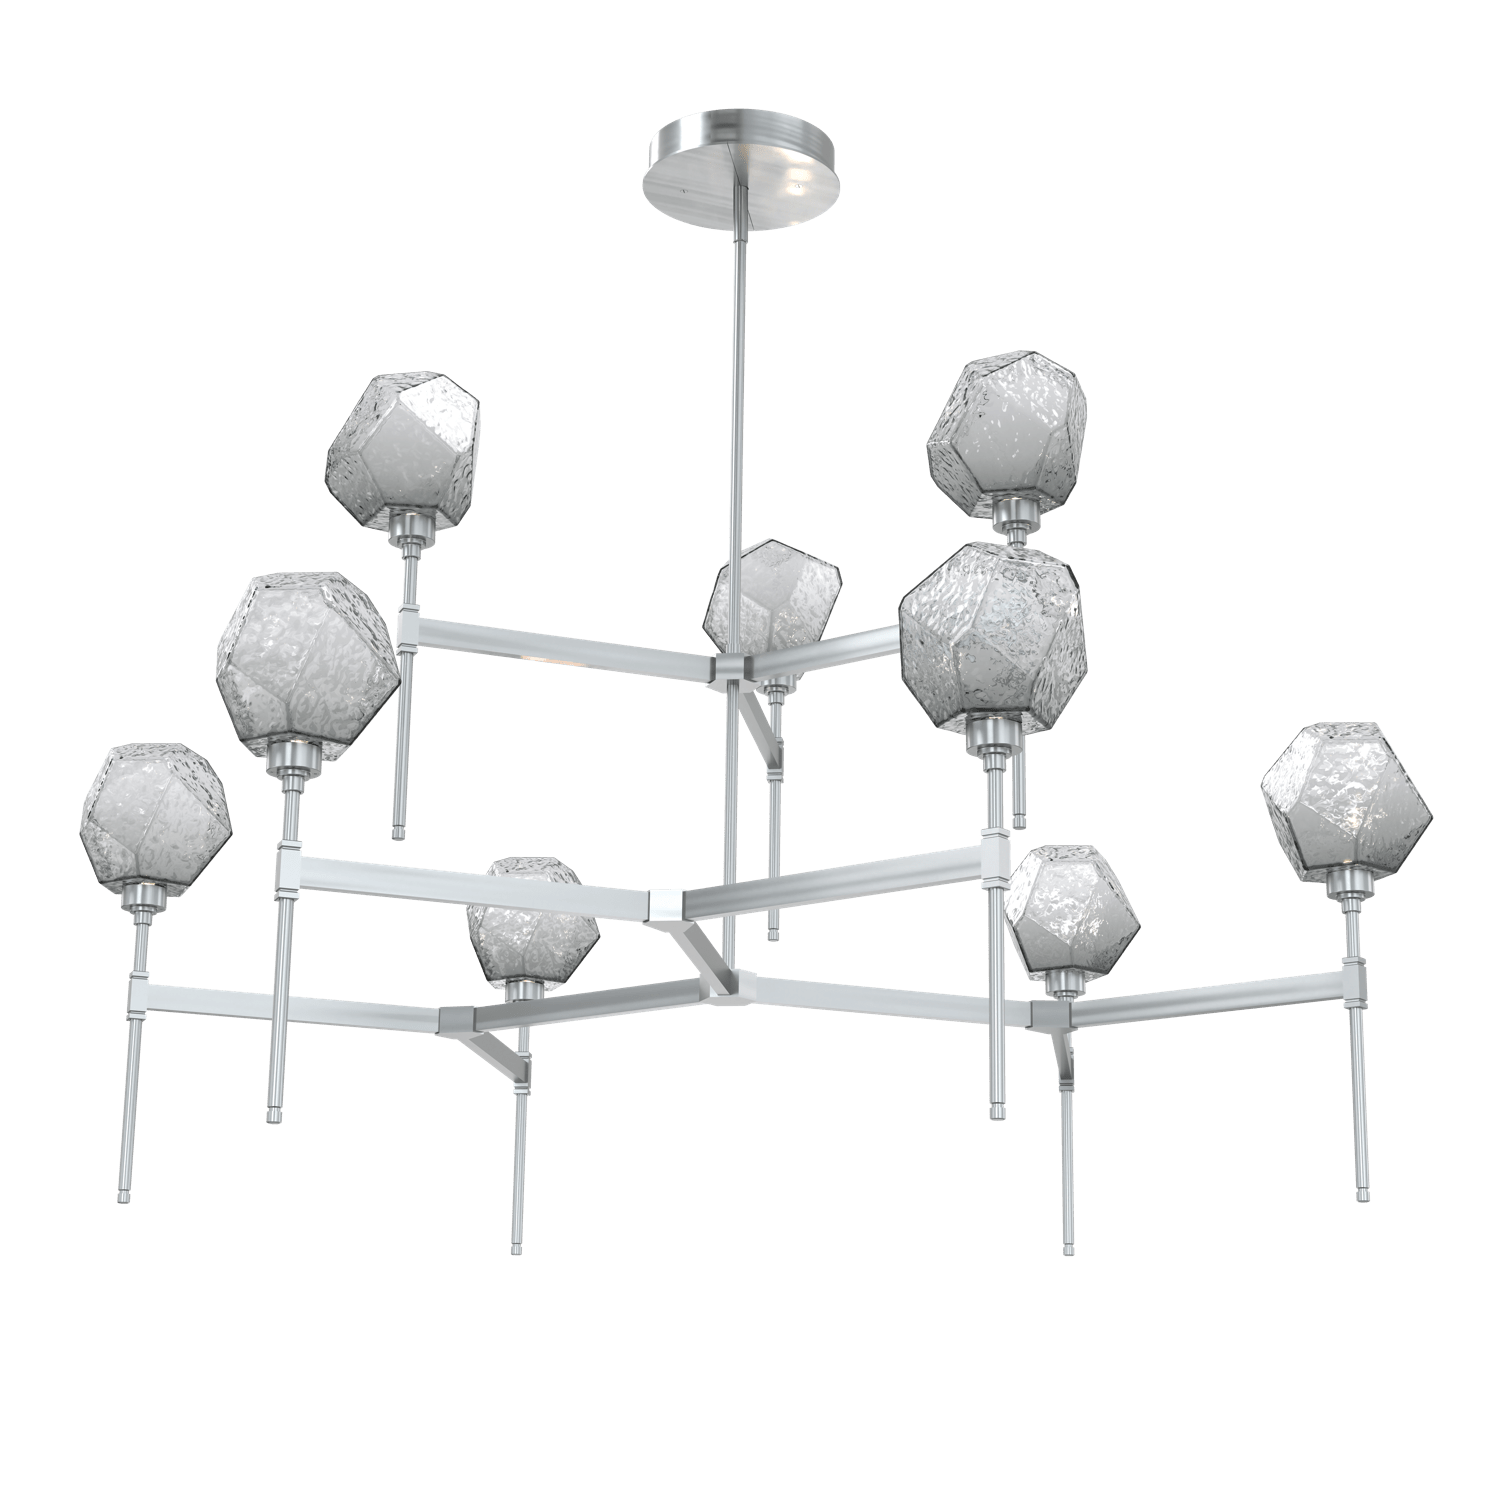 CHB0039-55-SN-S-Hammerton-Studio-Gem-round-two-tier-belvedere-chandelier-with-satin-nickel-finish-and-smoke-blown-glass-shades-and-LED-lamping